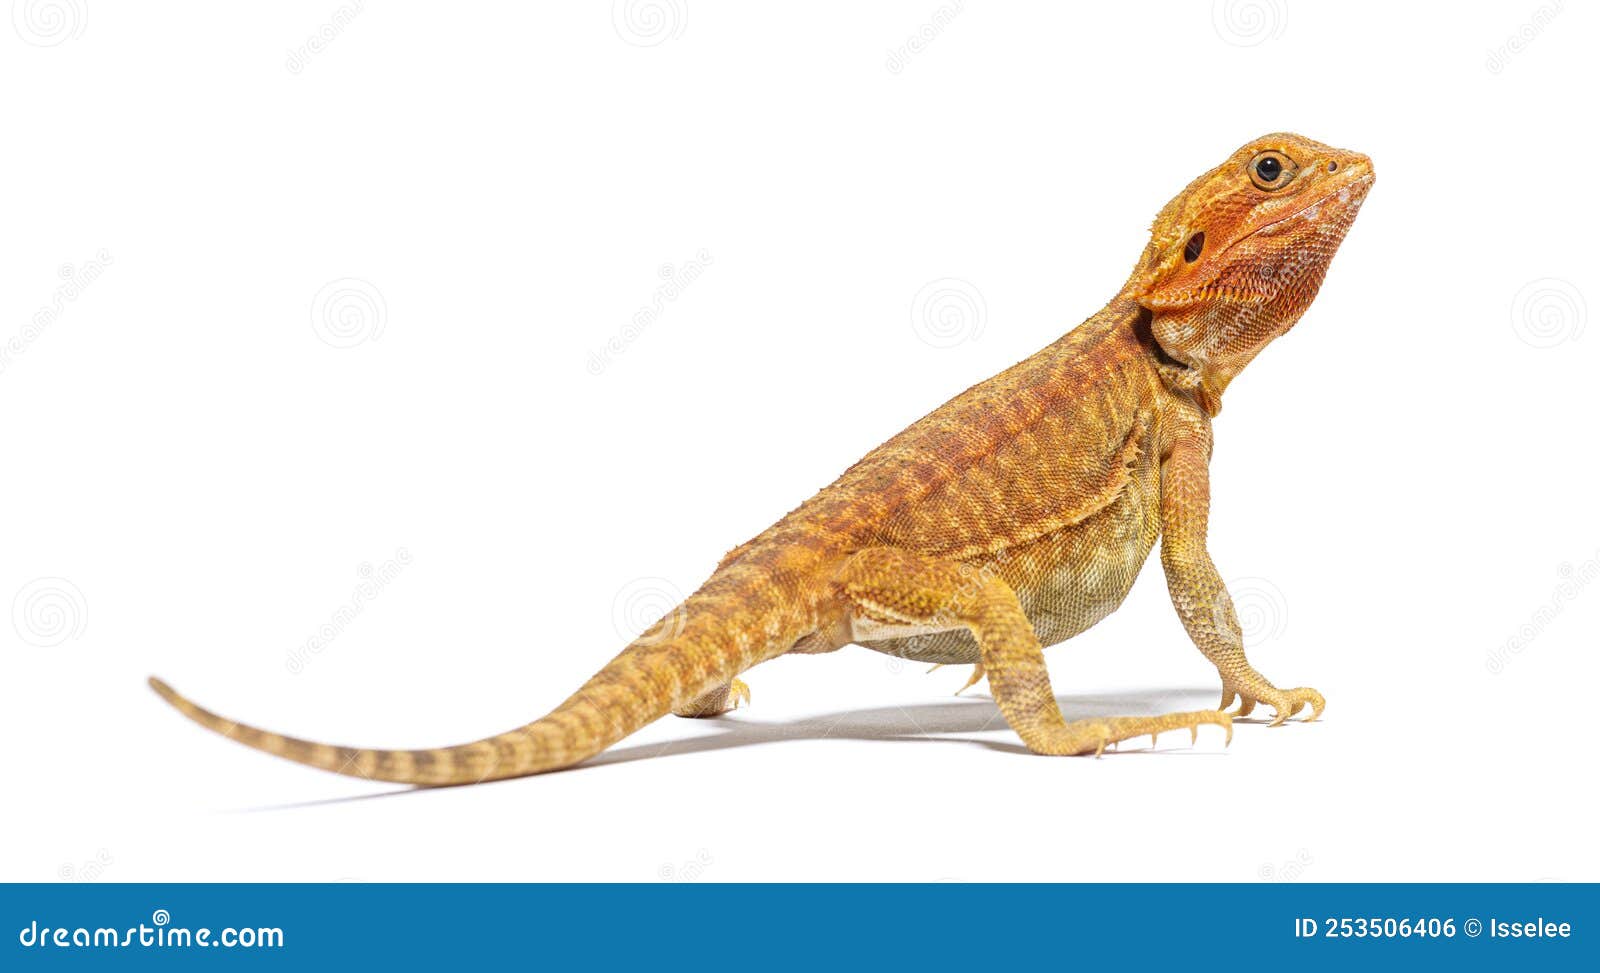 back view of a pogona looking up, agame barbu